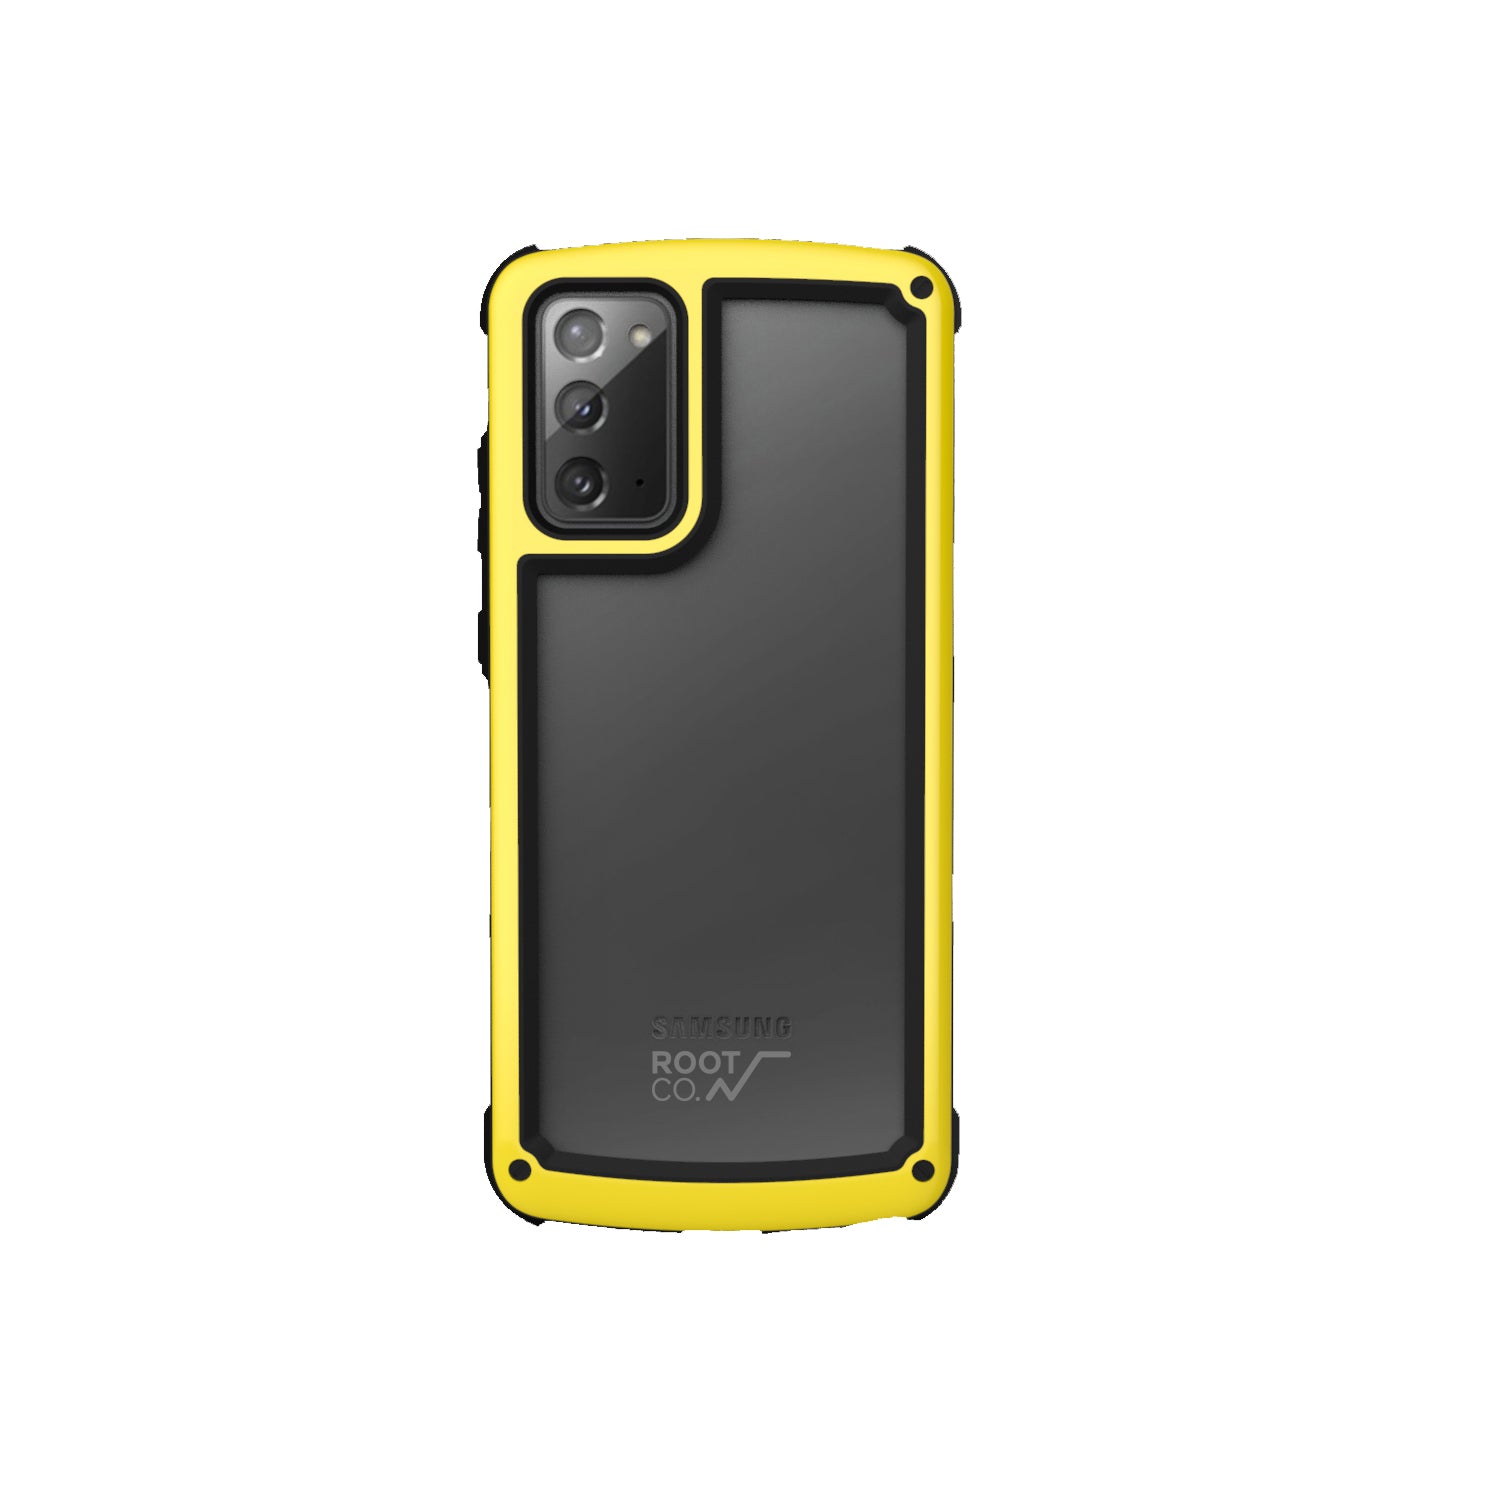 Shop and buy ROOT CO. Gravity Shock Resist Tough & Basic Case for Samsung Galaxy Note 20 (2020) Shockproof| Casefactorie® online with great deals and sales prices with fast and safe shipping. Casefactorie is the largest Singapore official authorised retailer for the largest collection of mobile premium accessories.